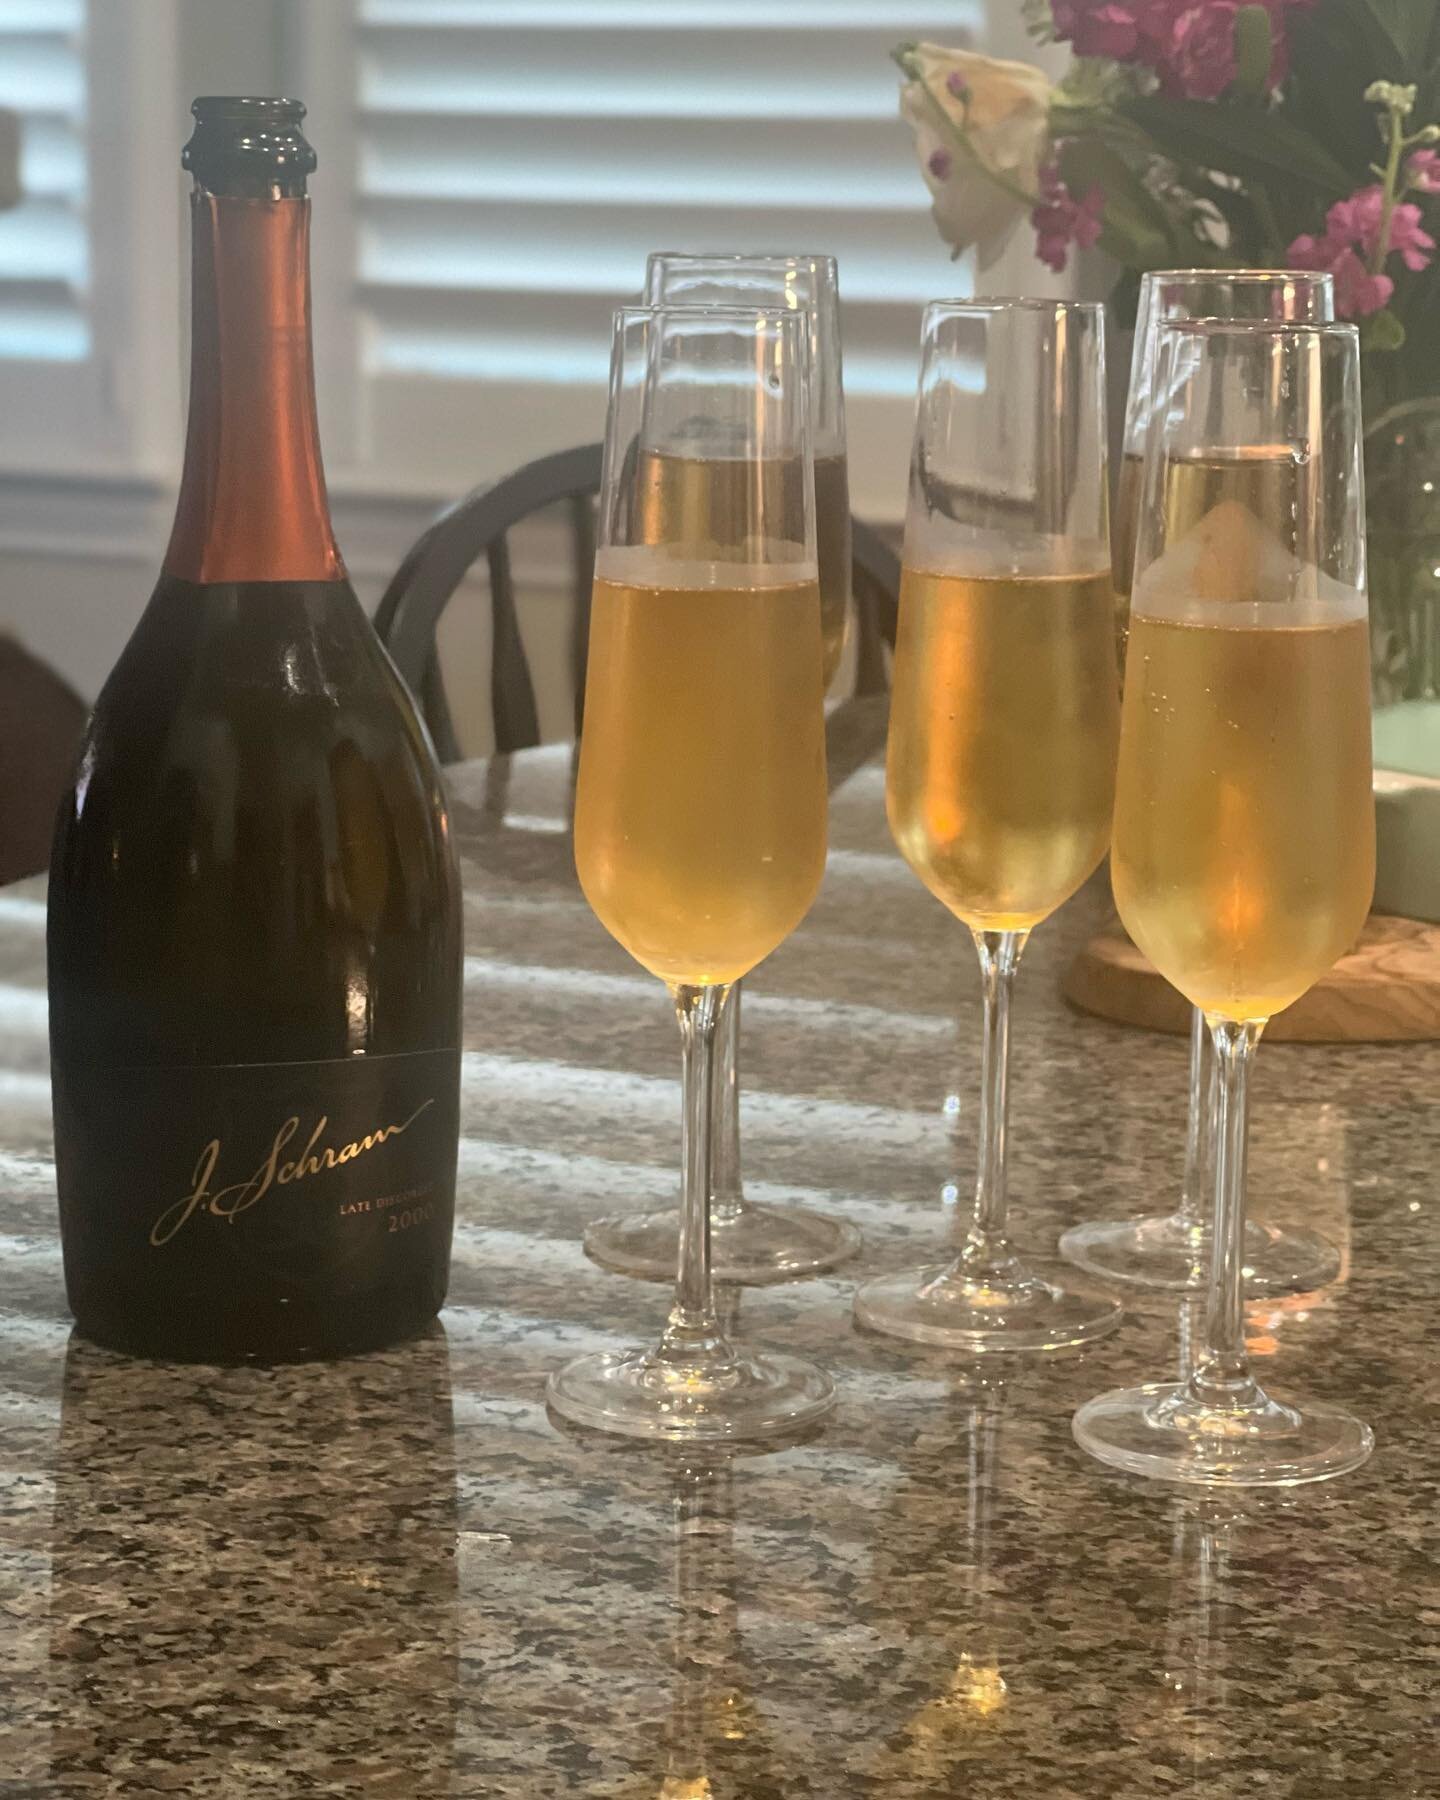 Mark and I have been saving a JSchram 2000 for a special day. ..No better occasion than a family celebration for the engagement of our son and our future daughter-in-law ❤️ Welcome to the family @caitlinmacrina! #wedding #love #family #schramsberg #w